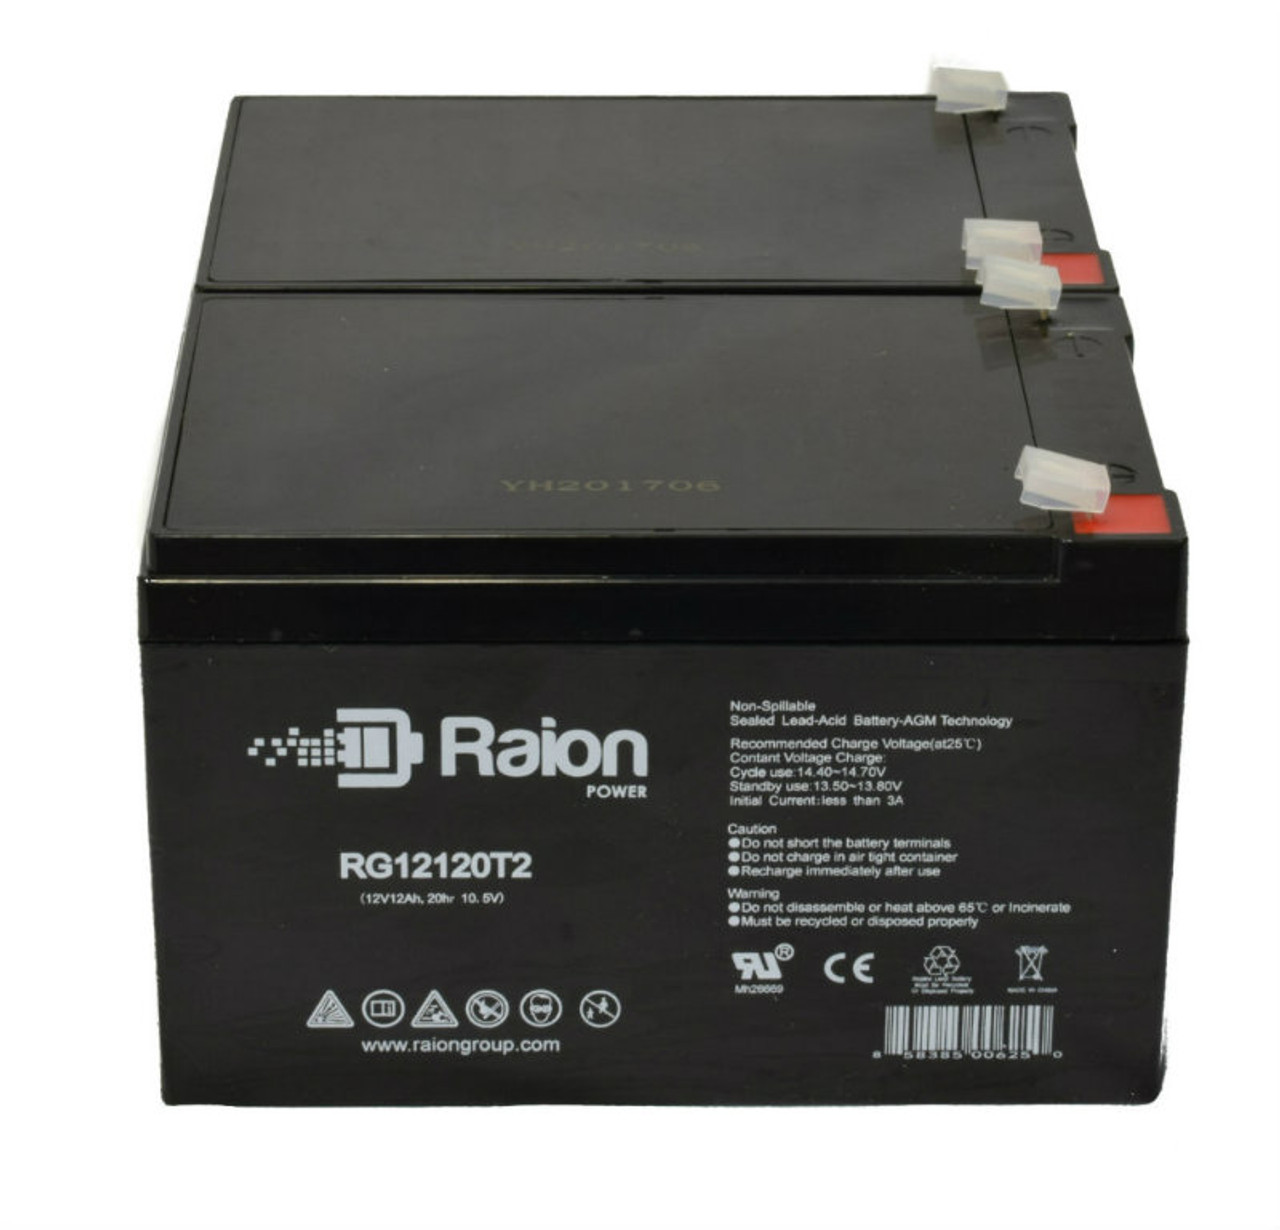 Raion Power 12V 12Ah Non-Spillable Compatible Replacement Battery for SES BT12-12(I) - (2 Pack)